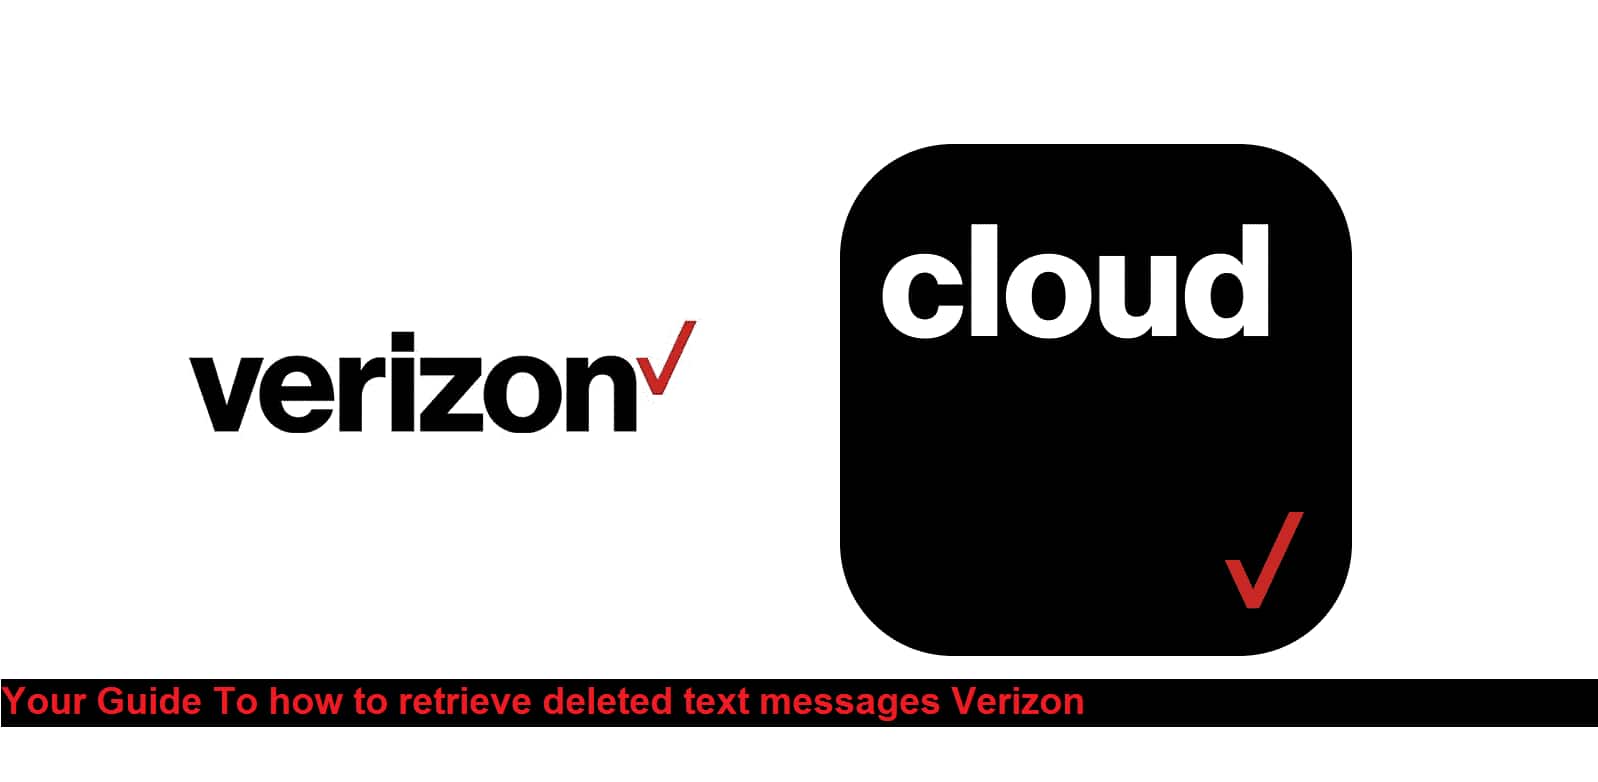 Your Guide To how to retrieve deleted text messages Verizon